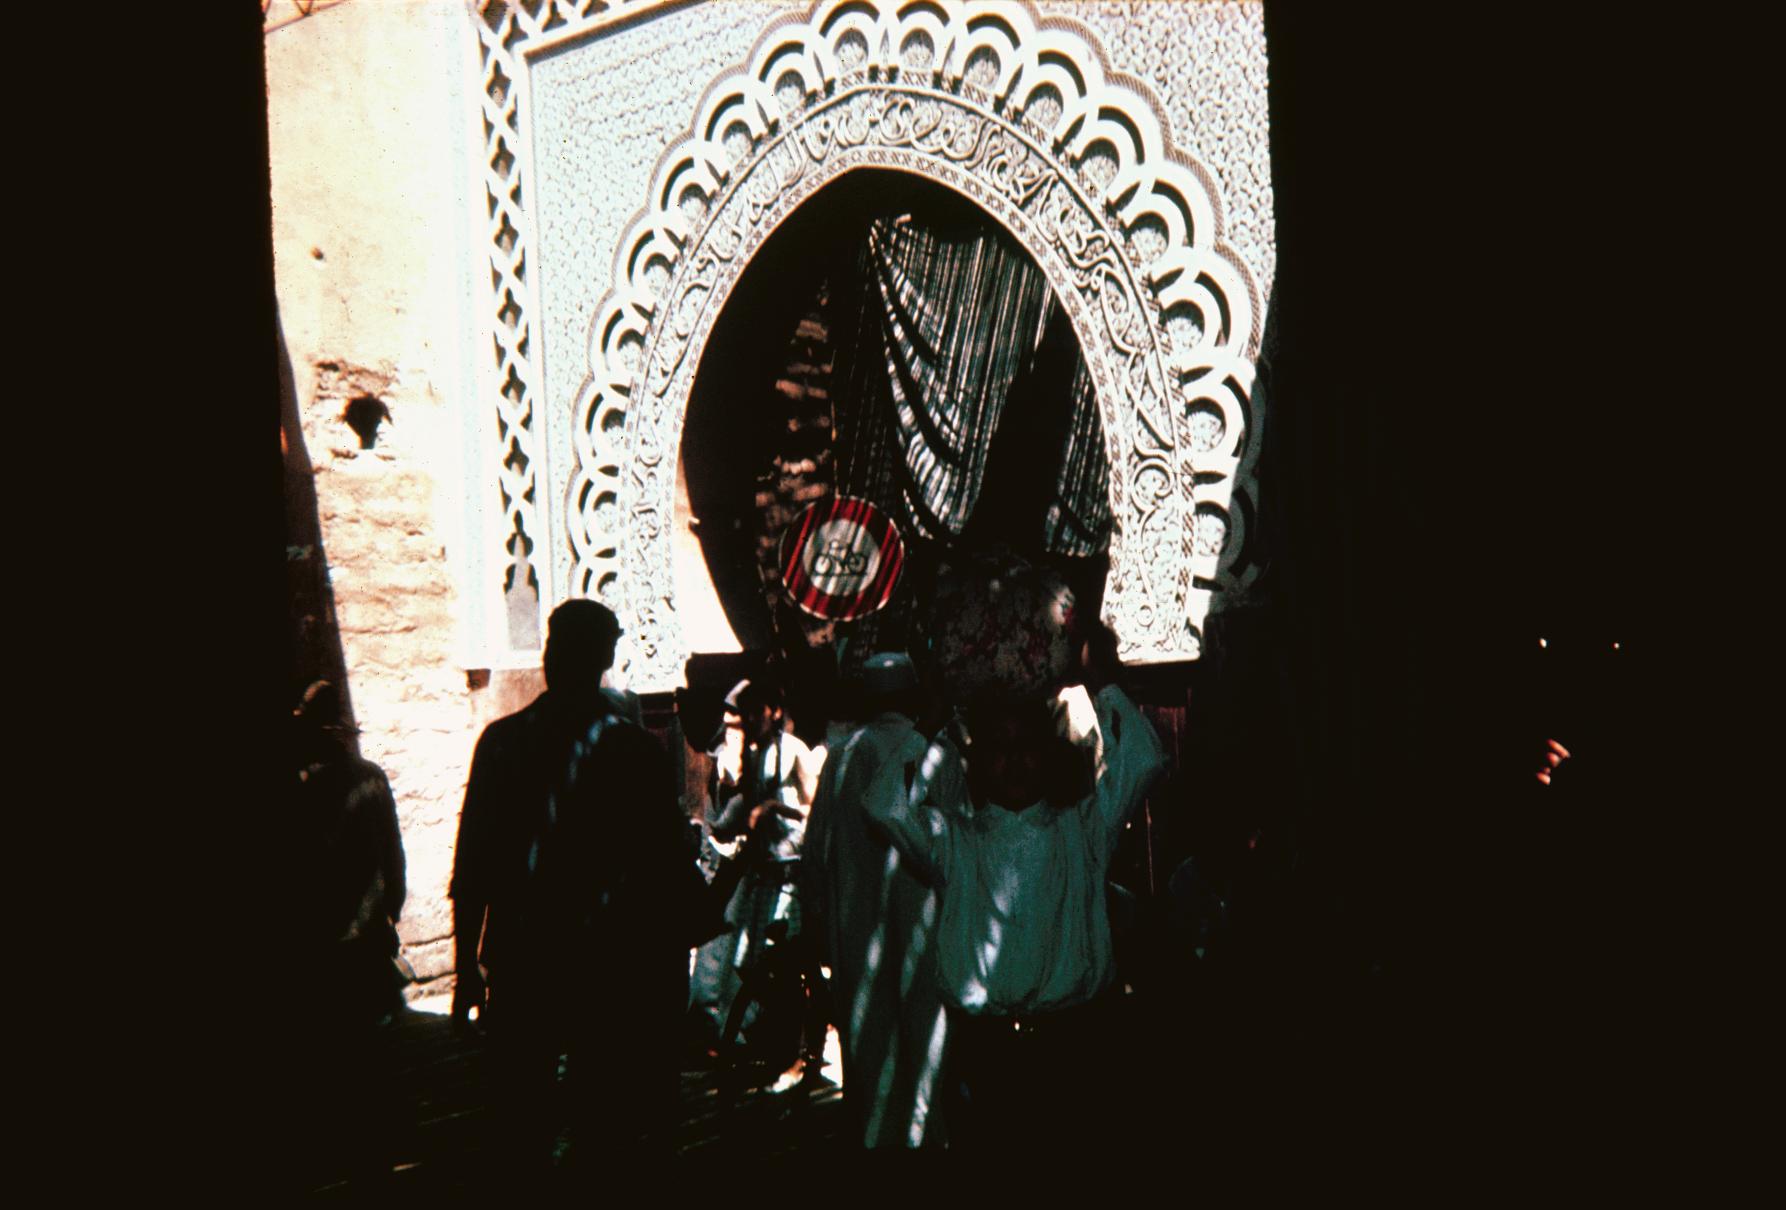 Carved Arch in the Souk in Marrakech